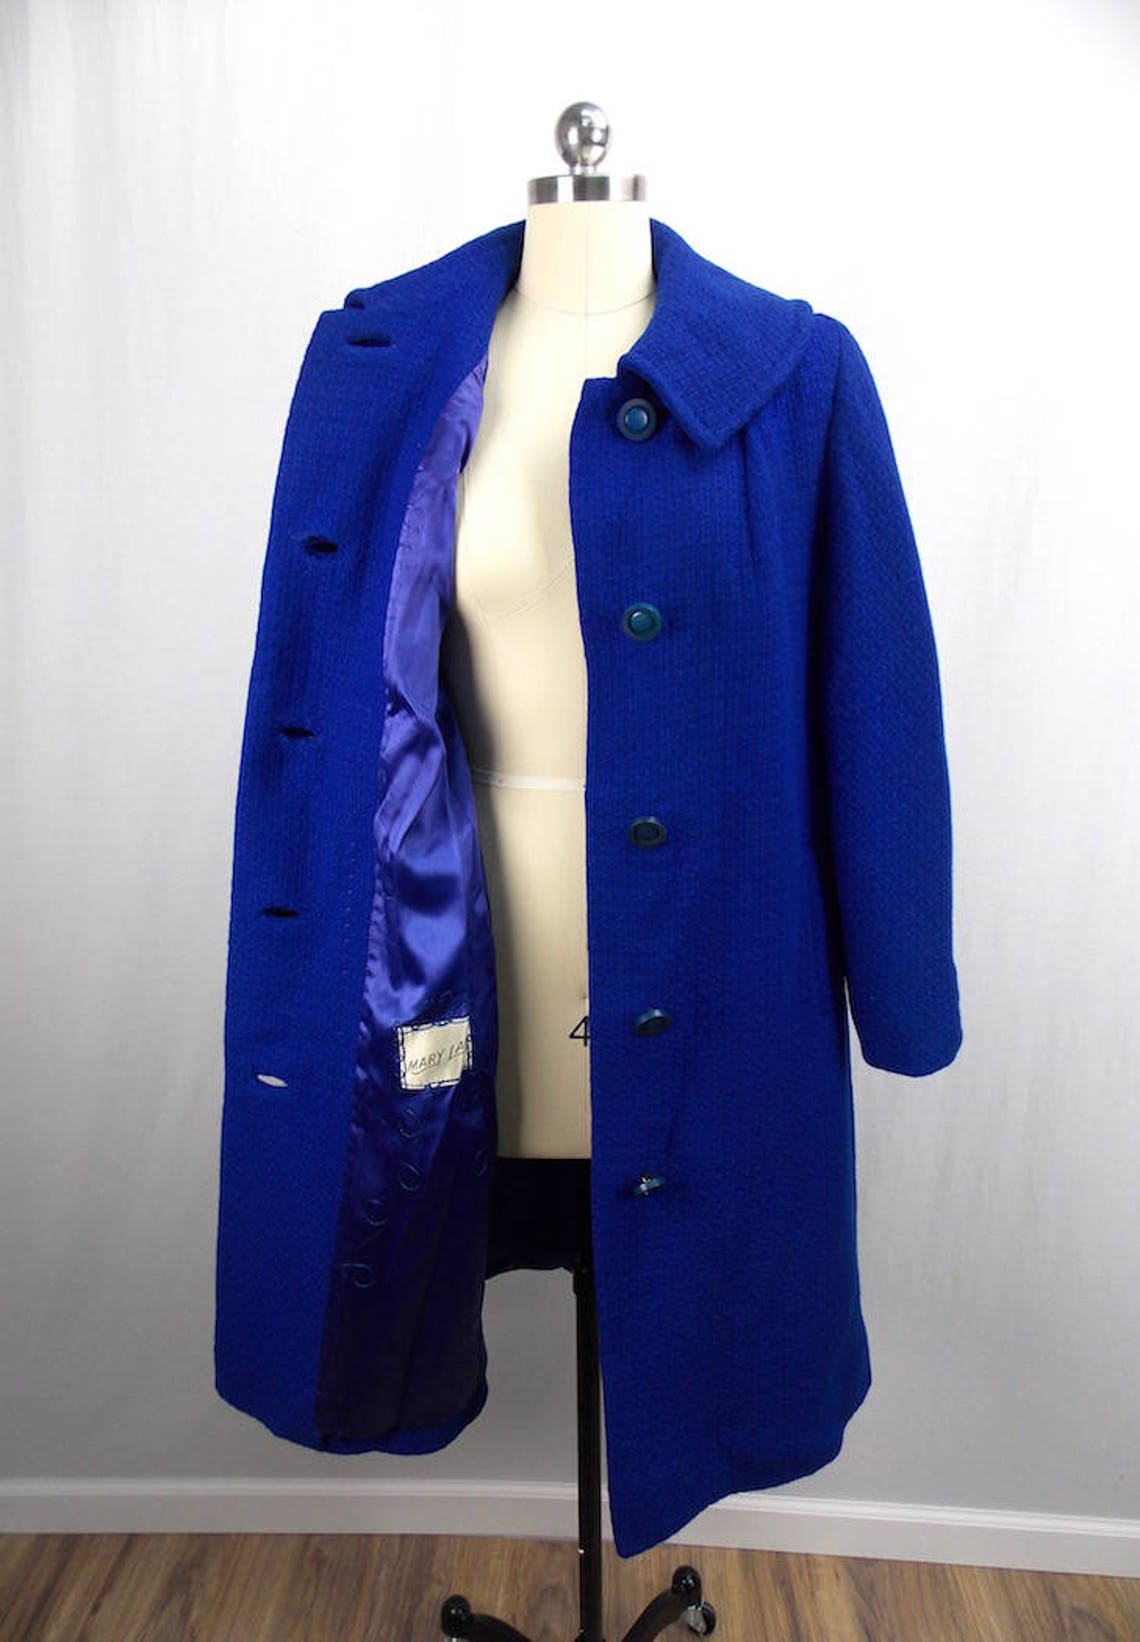 Cobalt Royal Blue Wool Coat with Satin Lining | Etsy